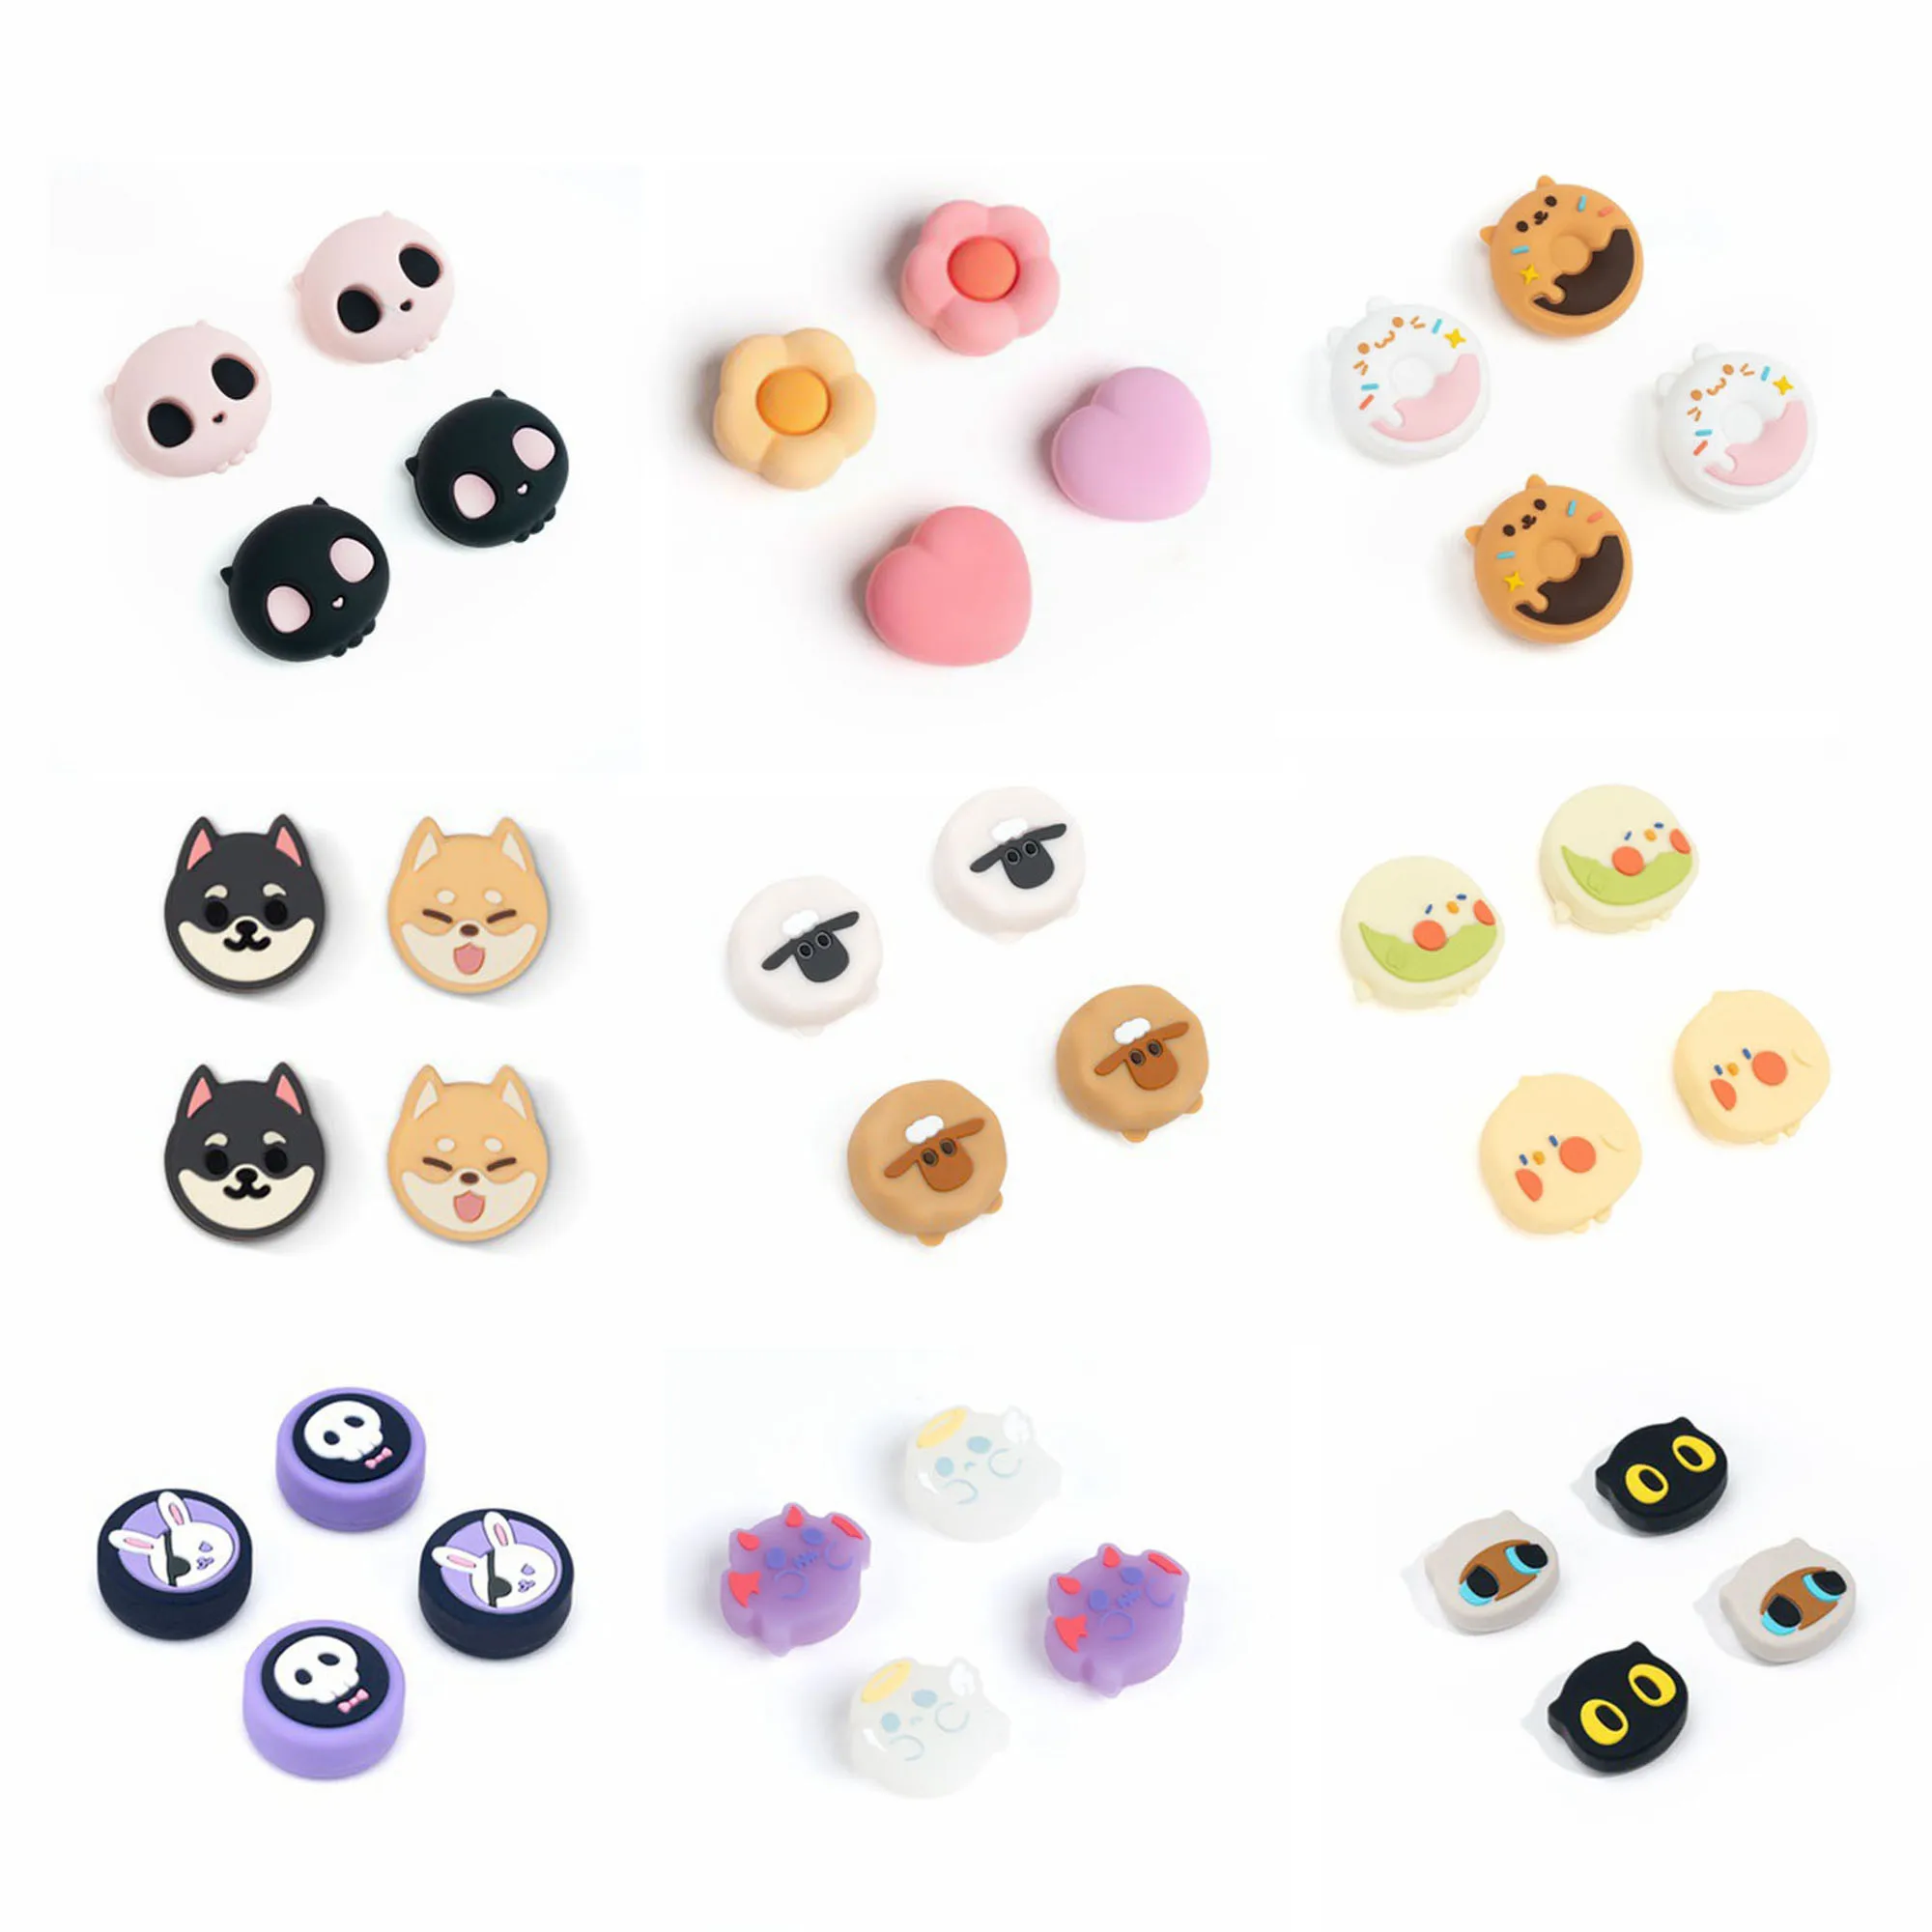 New Cute Animals Silicone Soft Thumb Stick Grip Cap Protective Cover For Switch Oled NS Lite Joy-con Controller Thumbstick Case